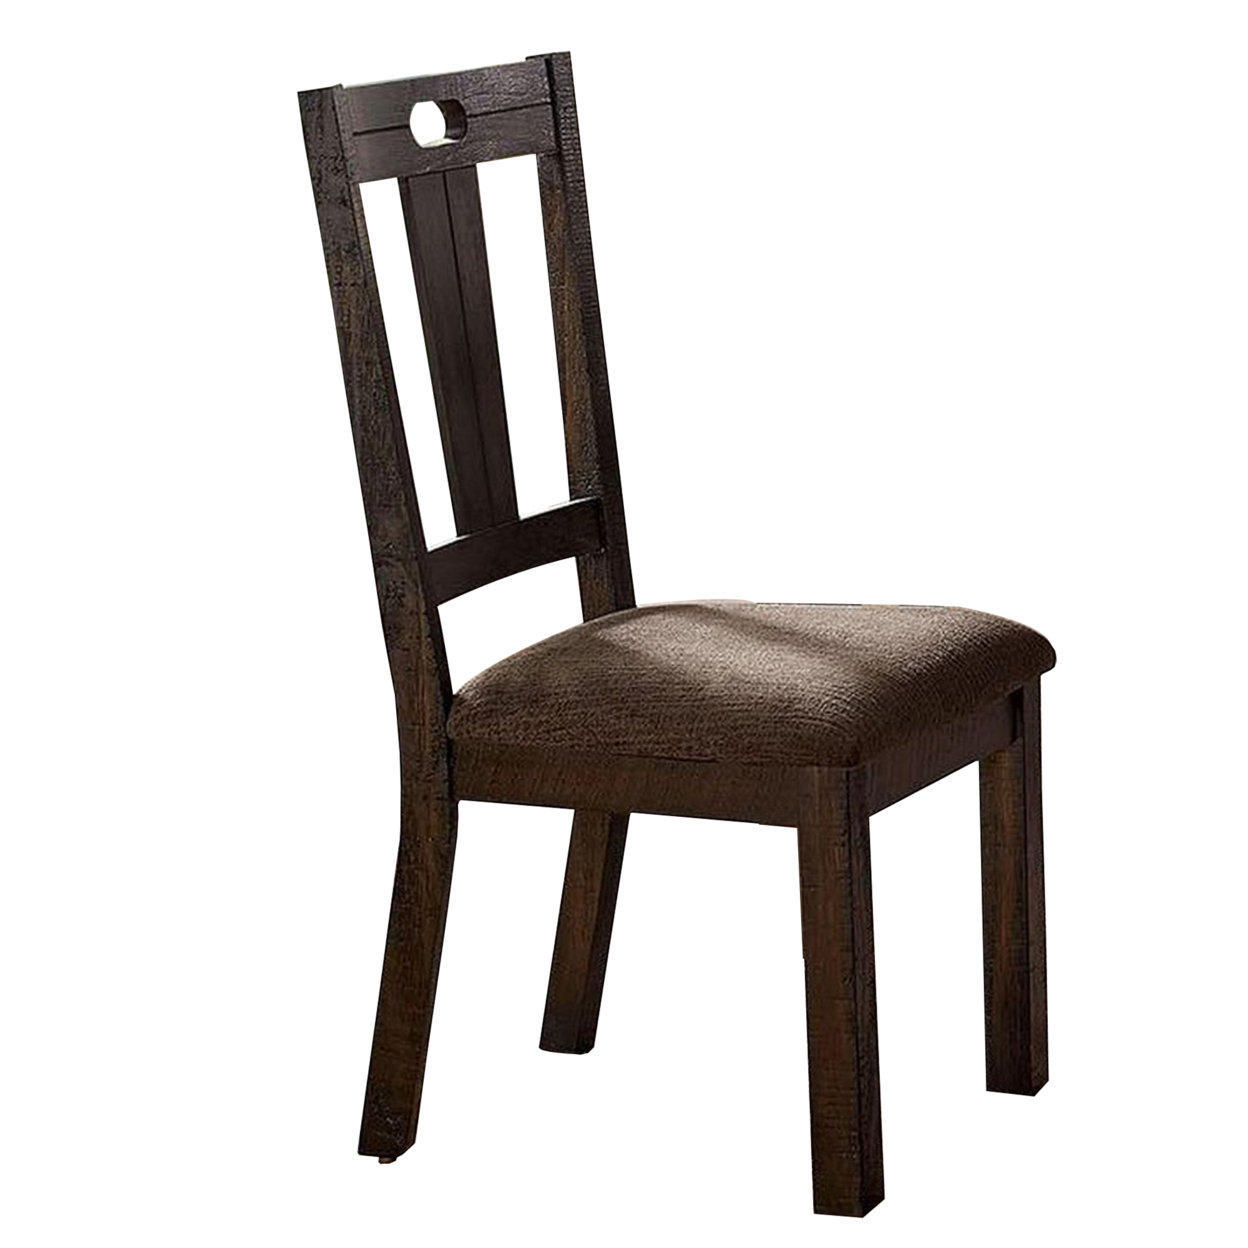 Wooden Side Chairs With Padded Seat, Set Of 2, Brown- Saltoro Sherpi